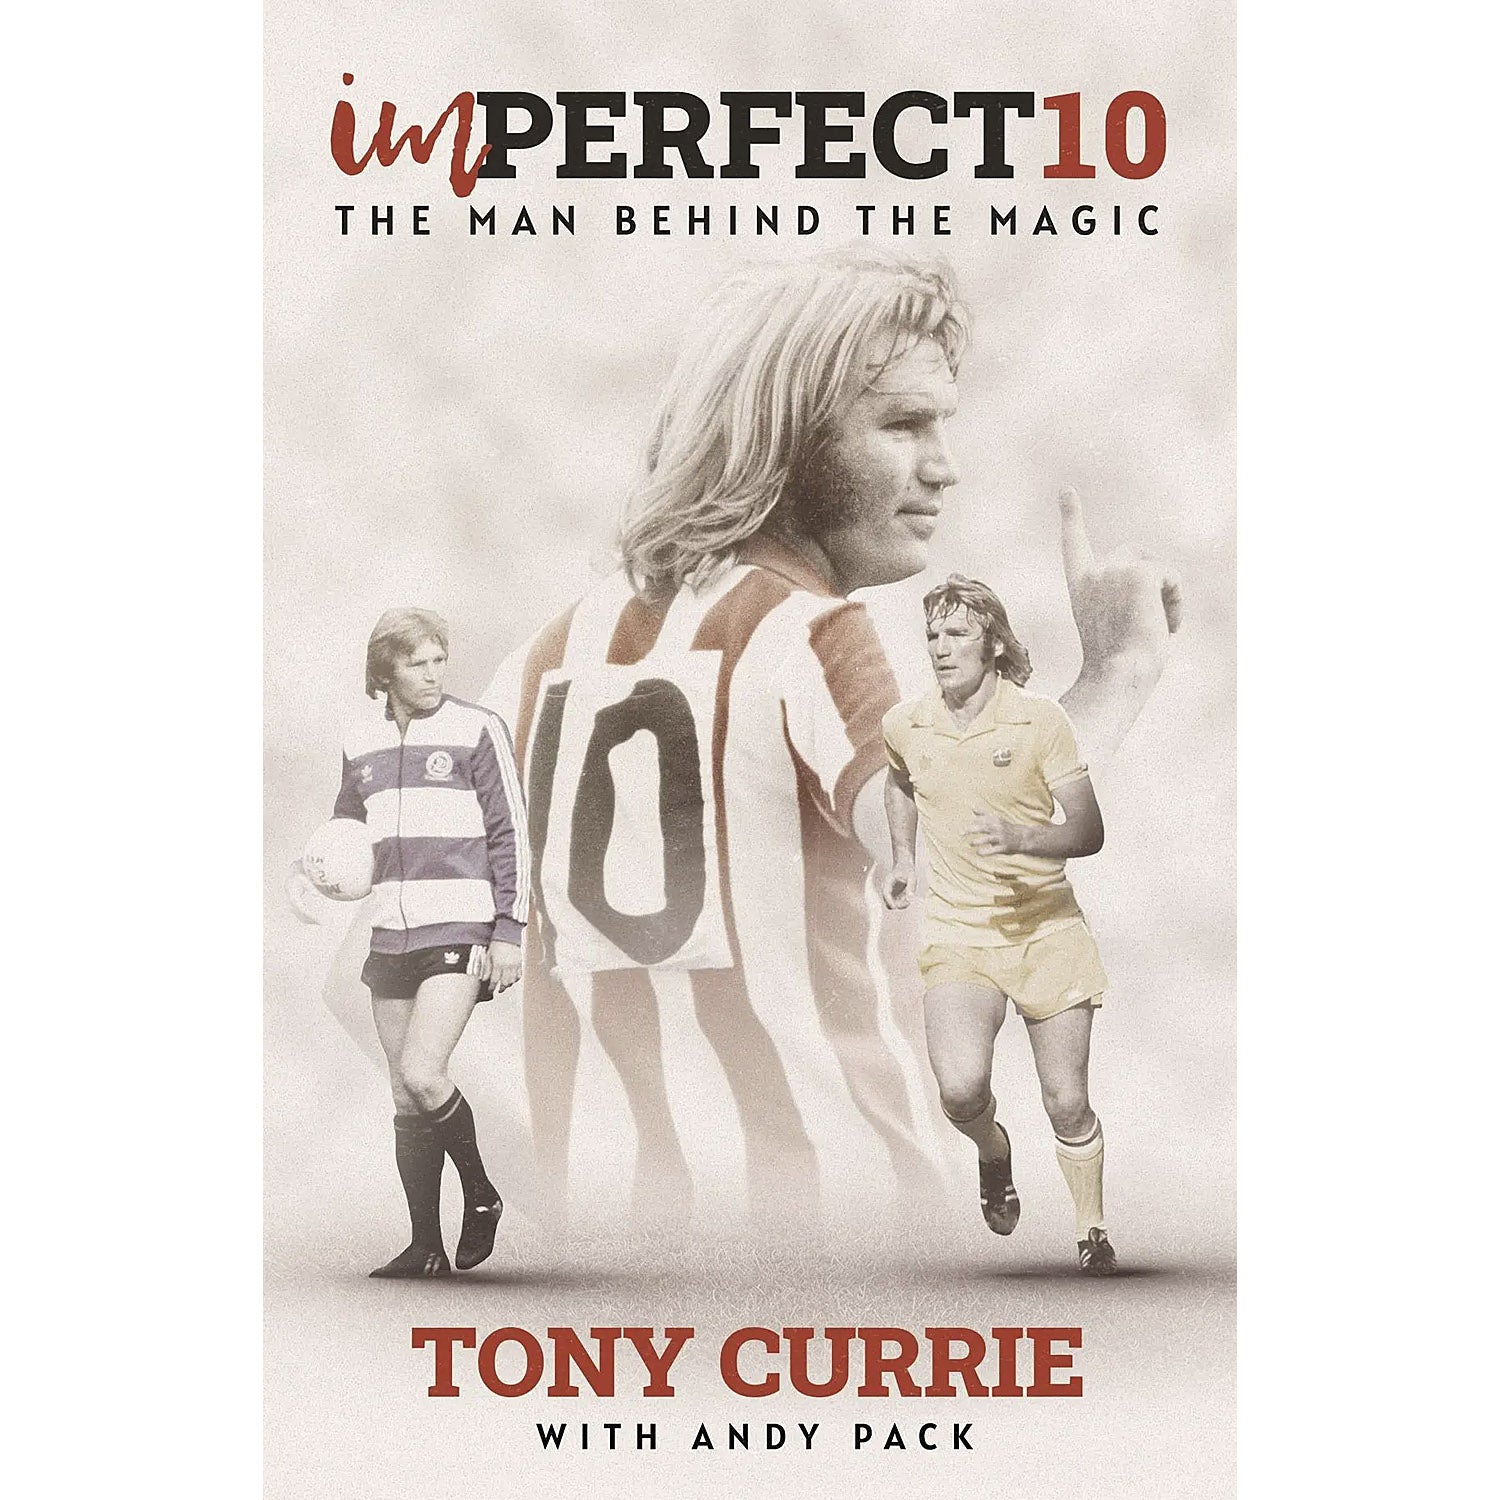 Imperfect 10 – Tony Currie – The Man Behind the Magic